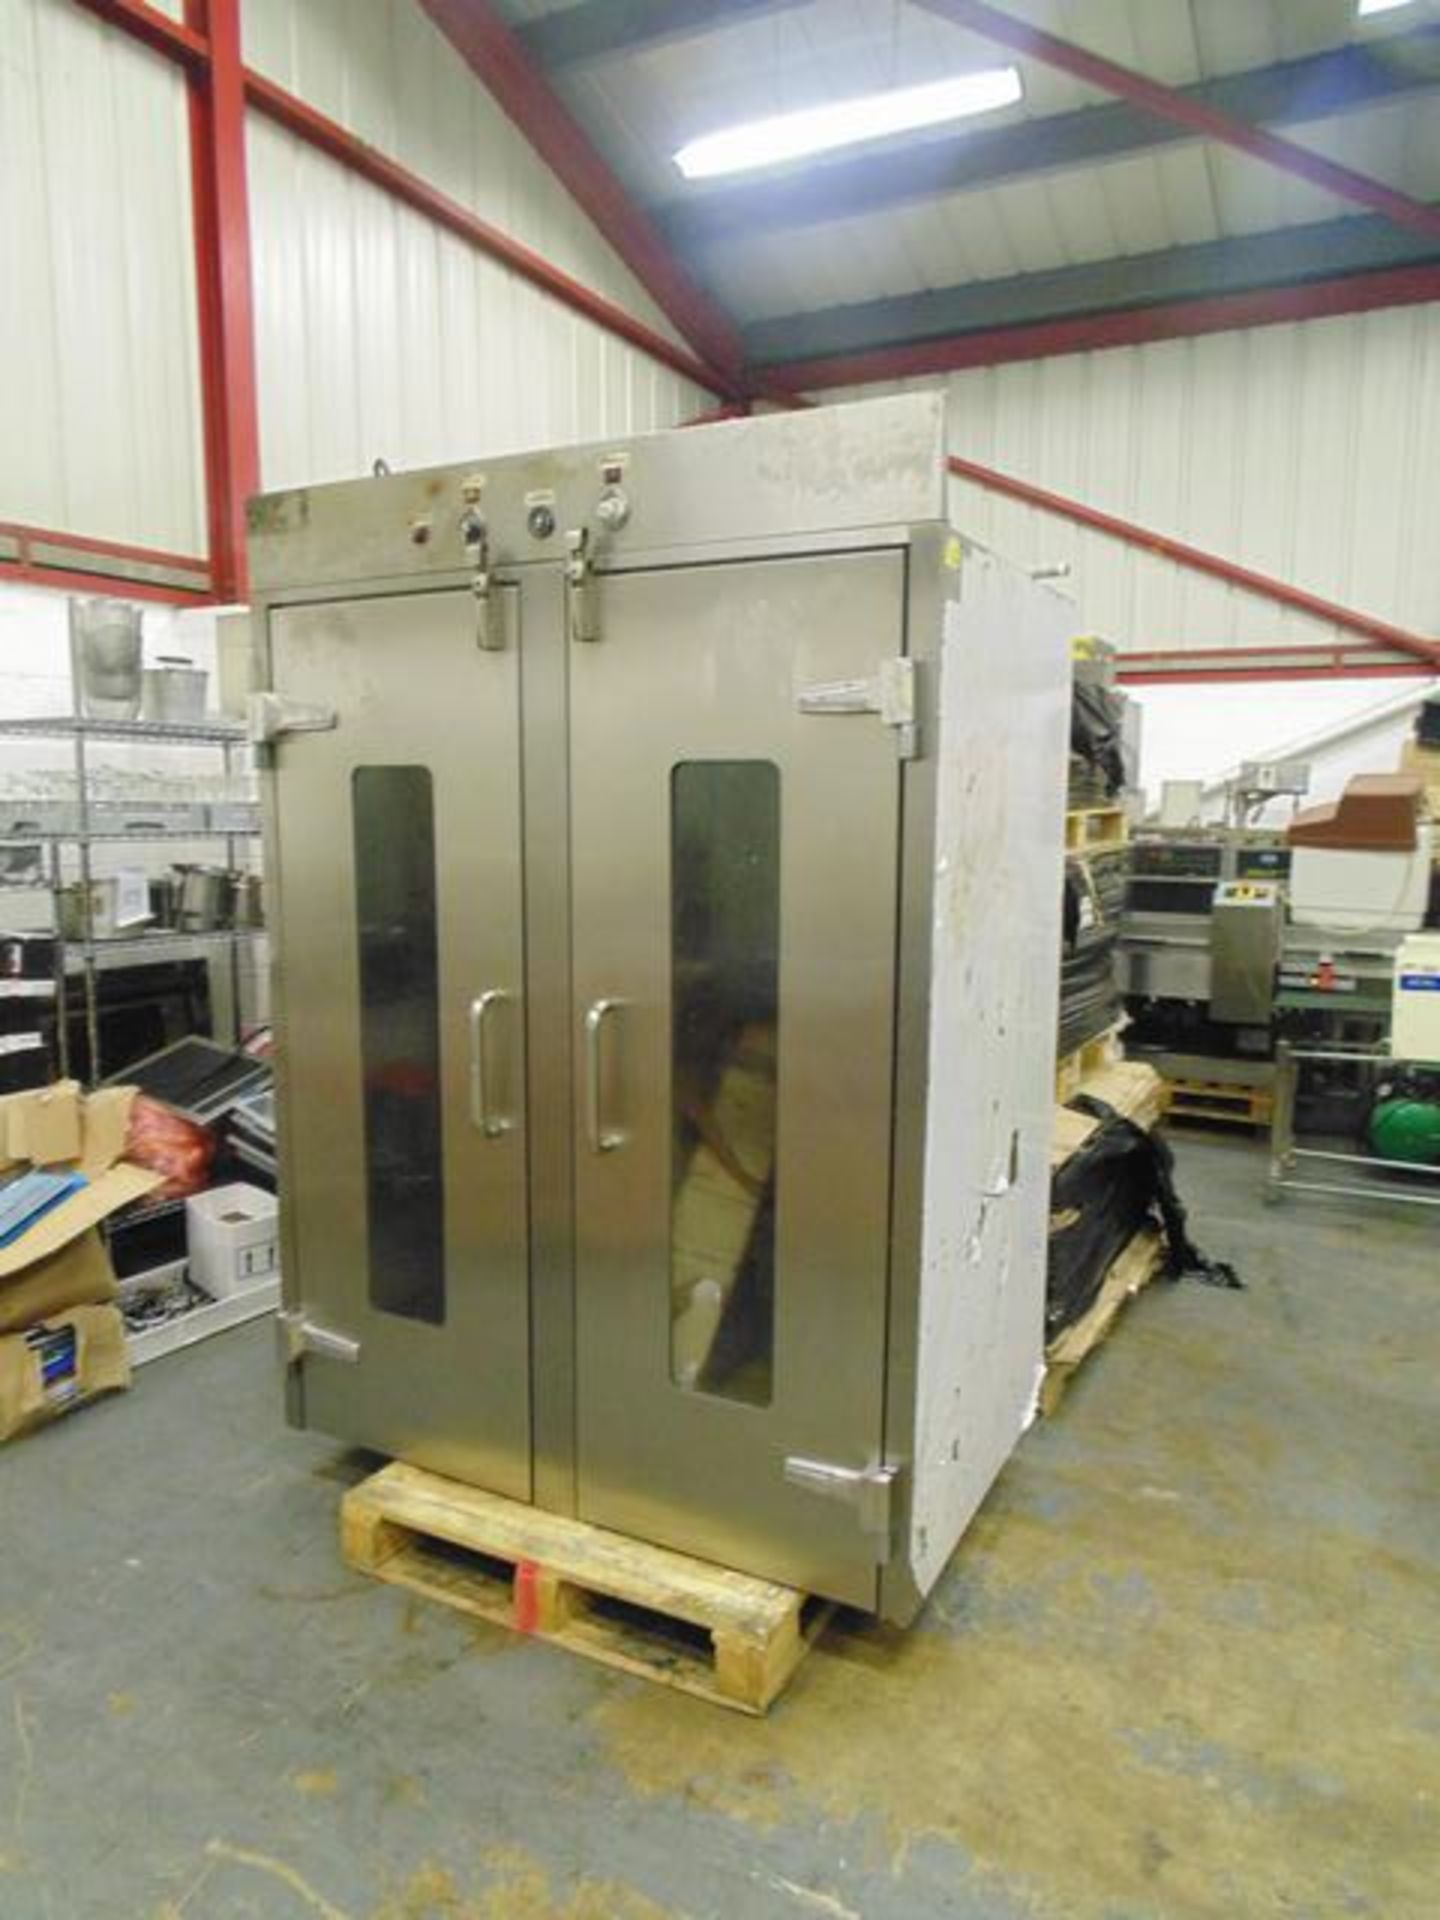 Prover Unit with Steam double door all stainless steel 3 phase electric 1550mm x 1000mm x 2100mm)